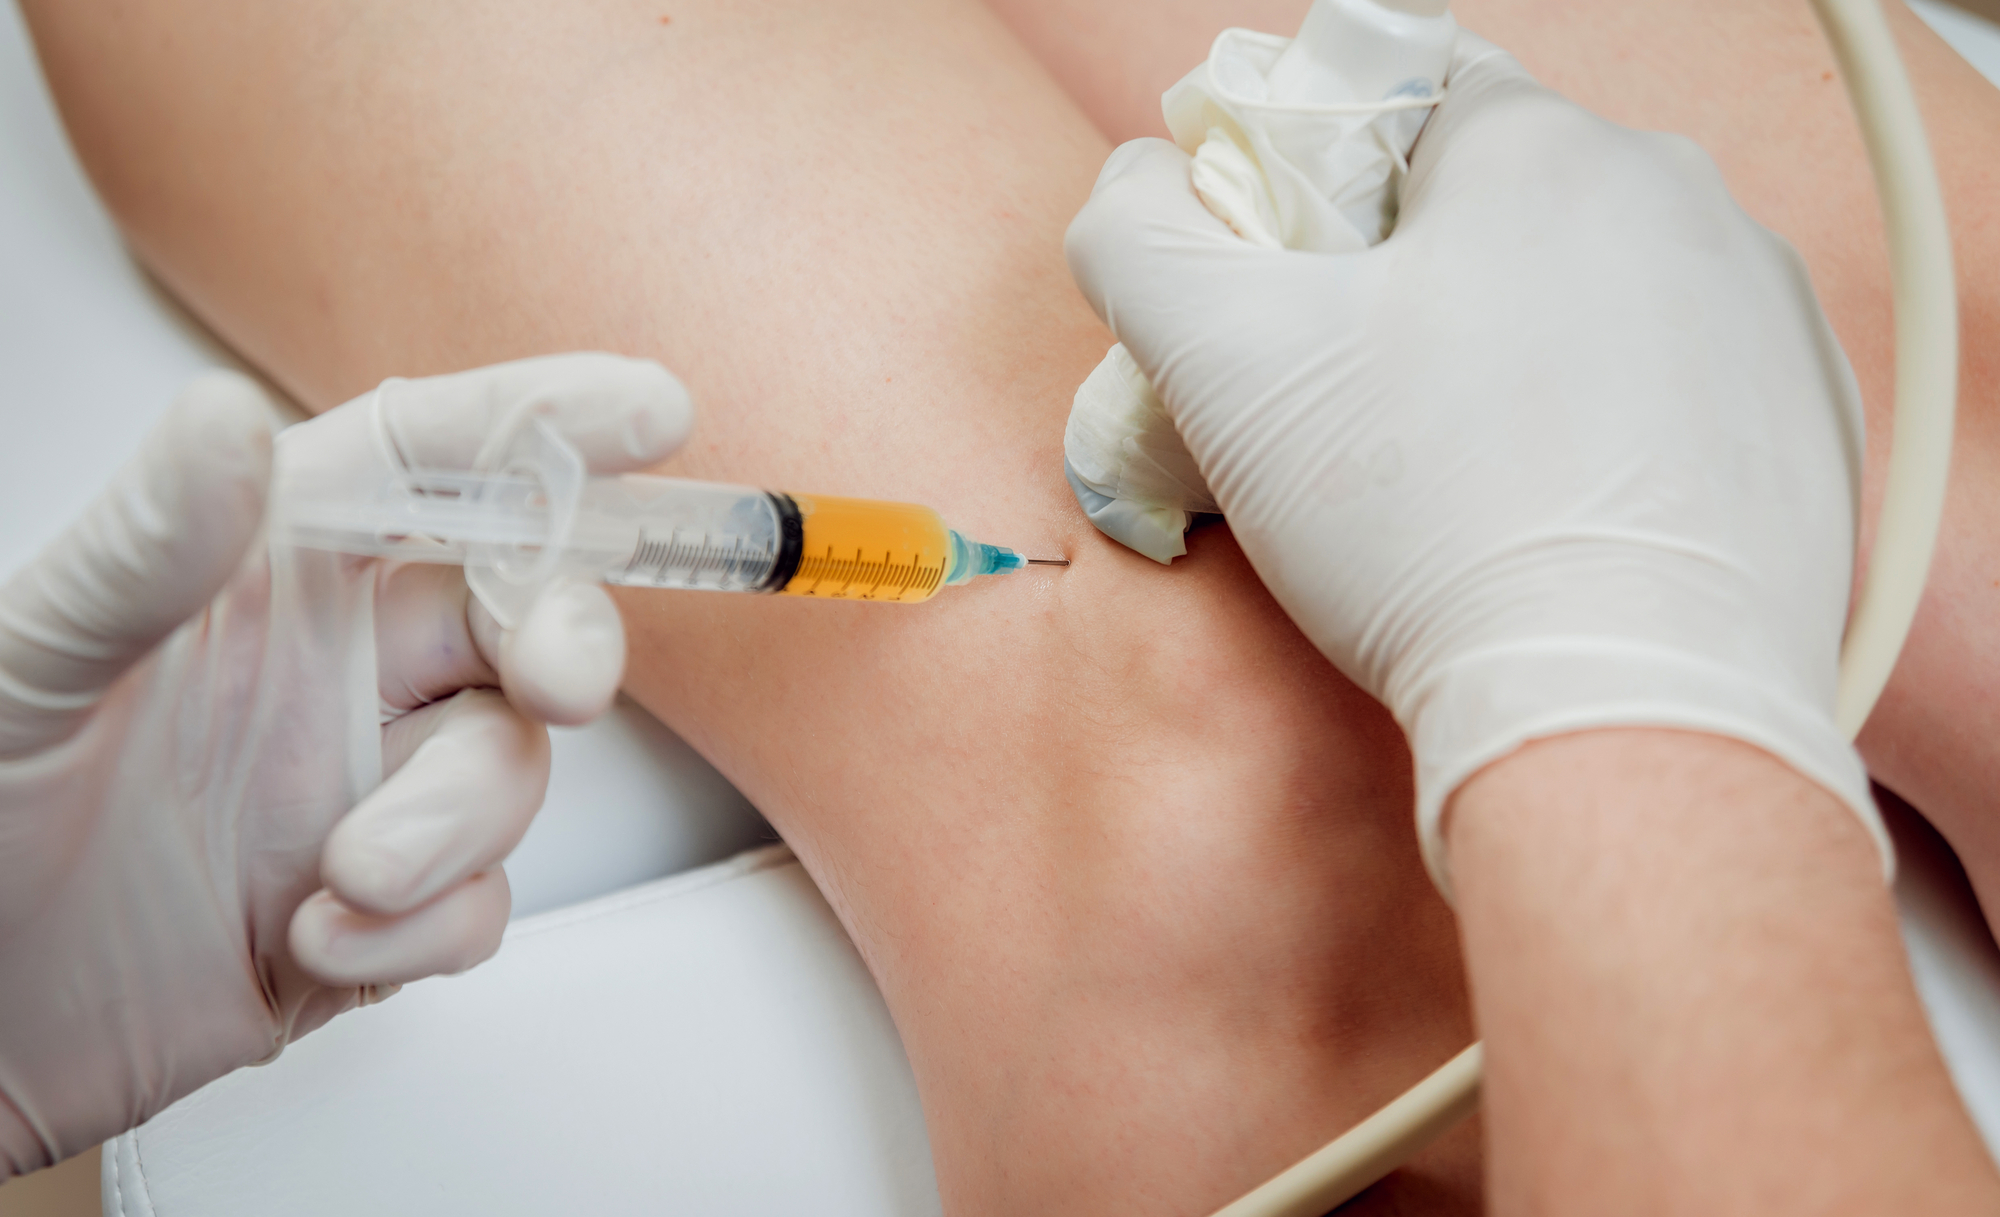 platelet-rich plasma (PRP) injection into knee with guided ultrasound